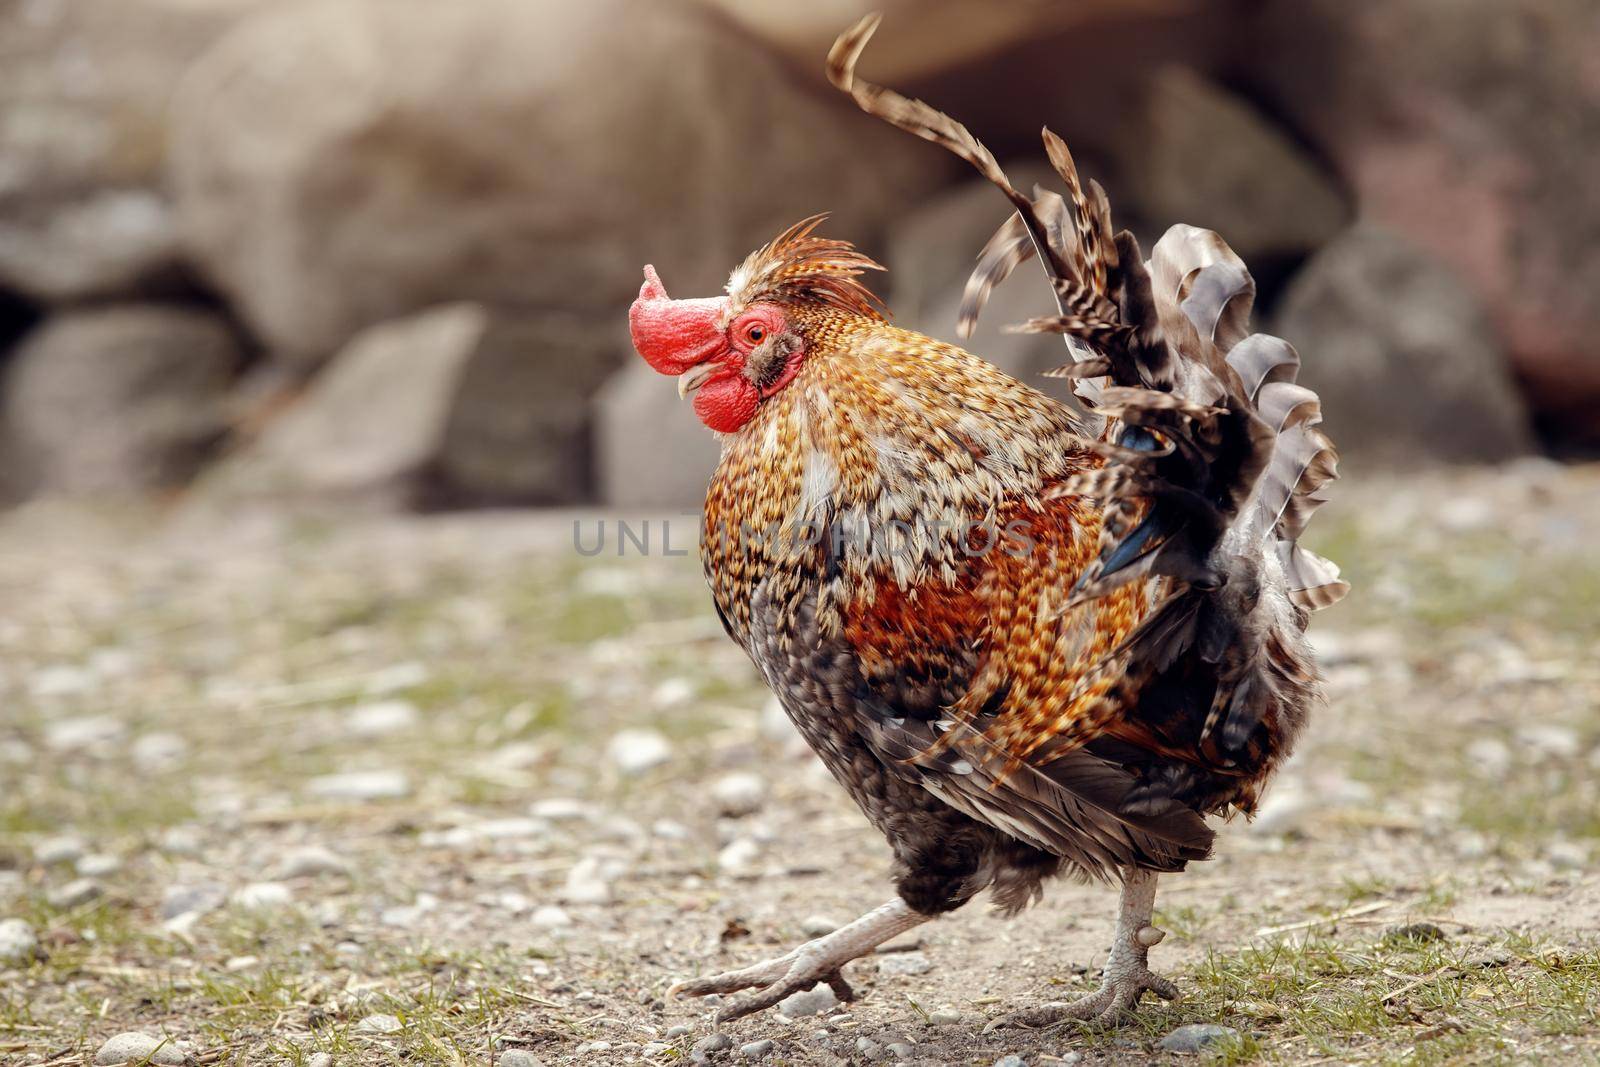 An ancient golden mini rooster walks in the village courtyard by Lincikas